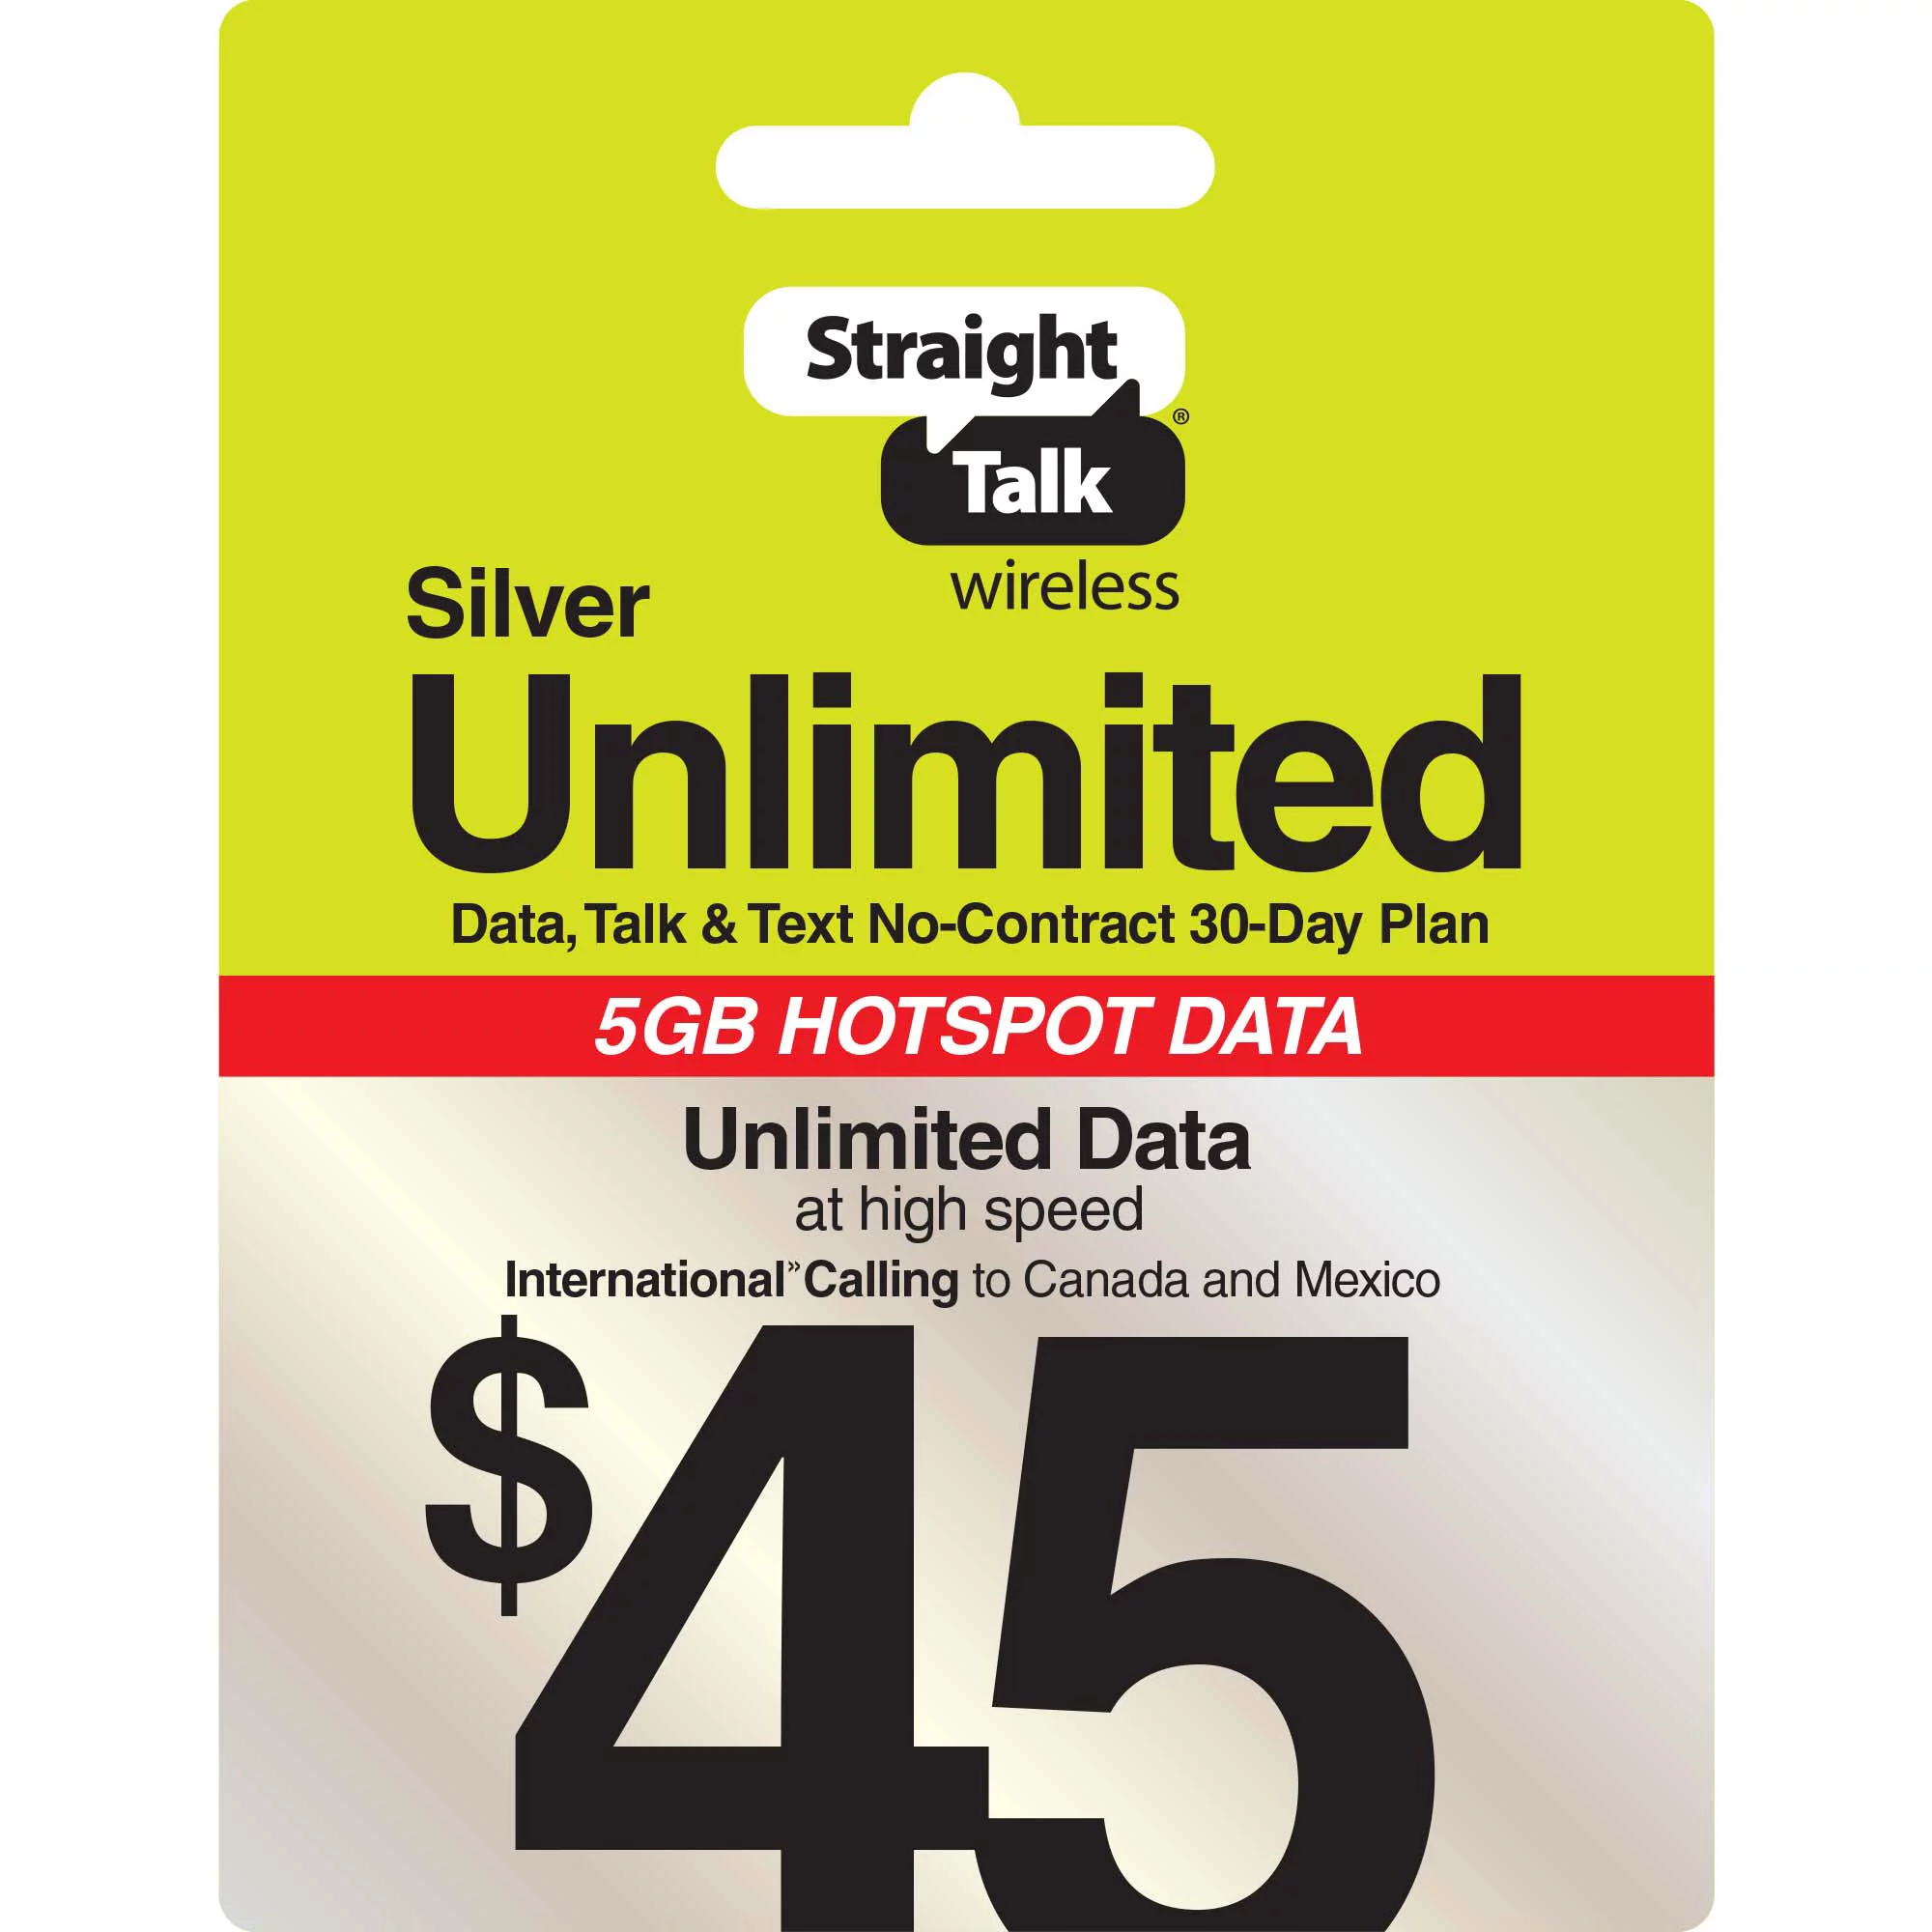 Straight Talk $45 Silver Unlimited 30-Day Prepaid Plan + 10GB Hotspot Data + Int'l Calling Direct Top Up